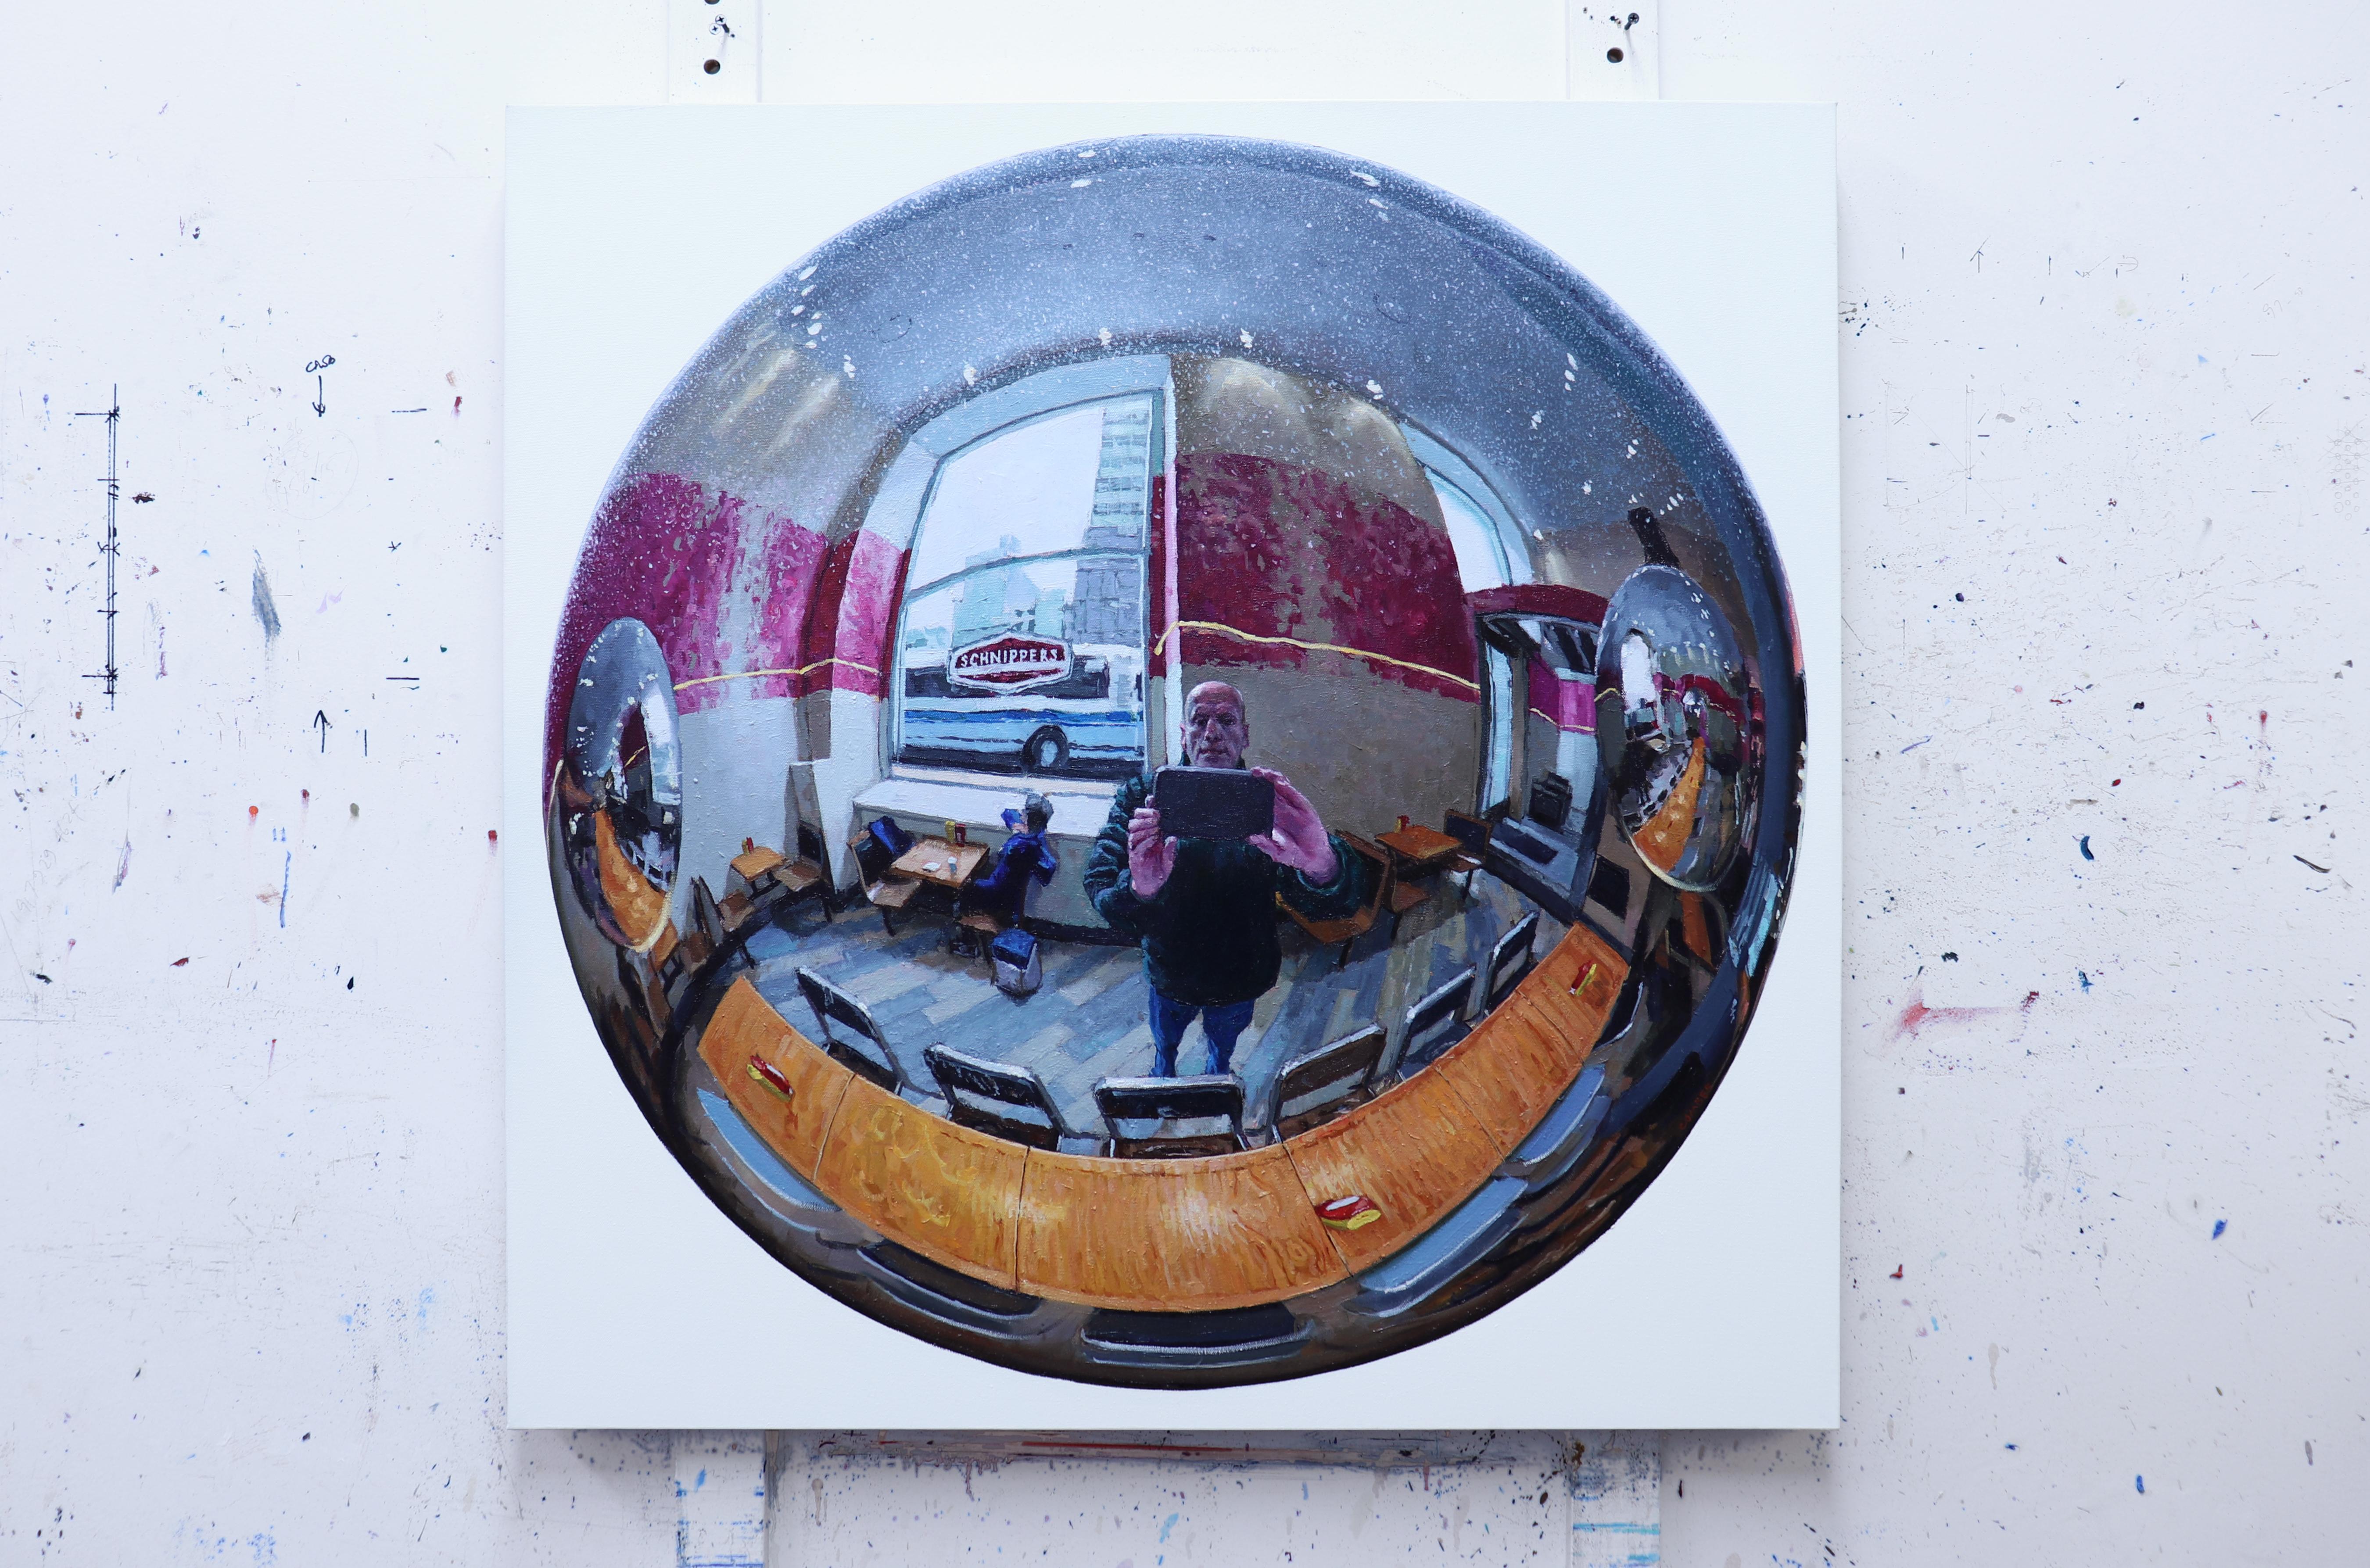 Fascinated by the reflections in common, everyday objects, Richard Combes reinvents the act of the selfie by depicting himself and his cell phone in the convex mirror of a restaurant's light fixture.